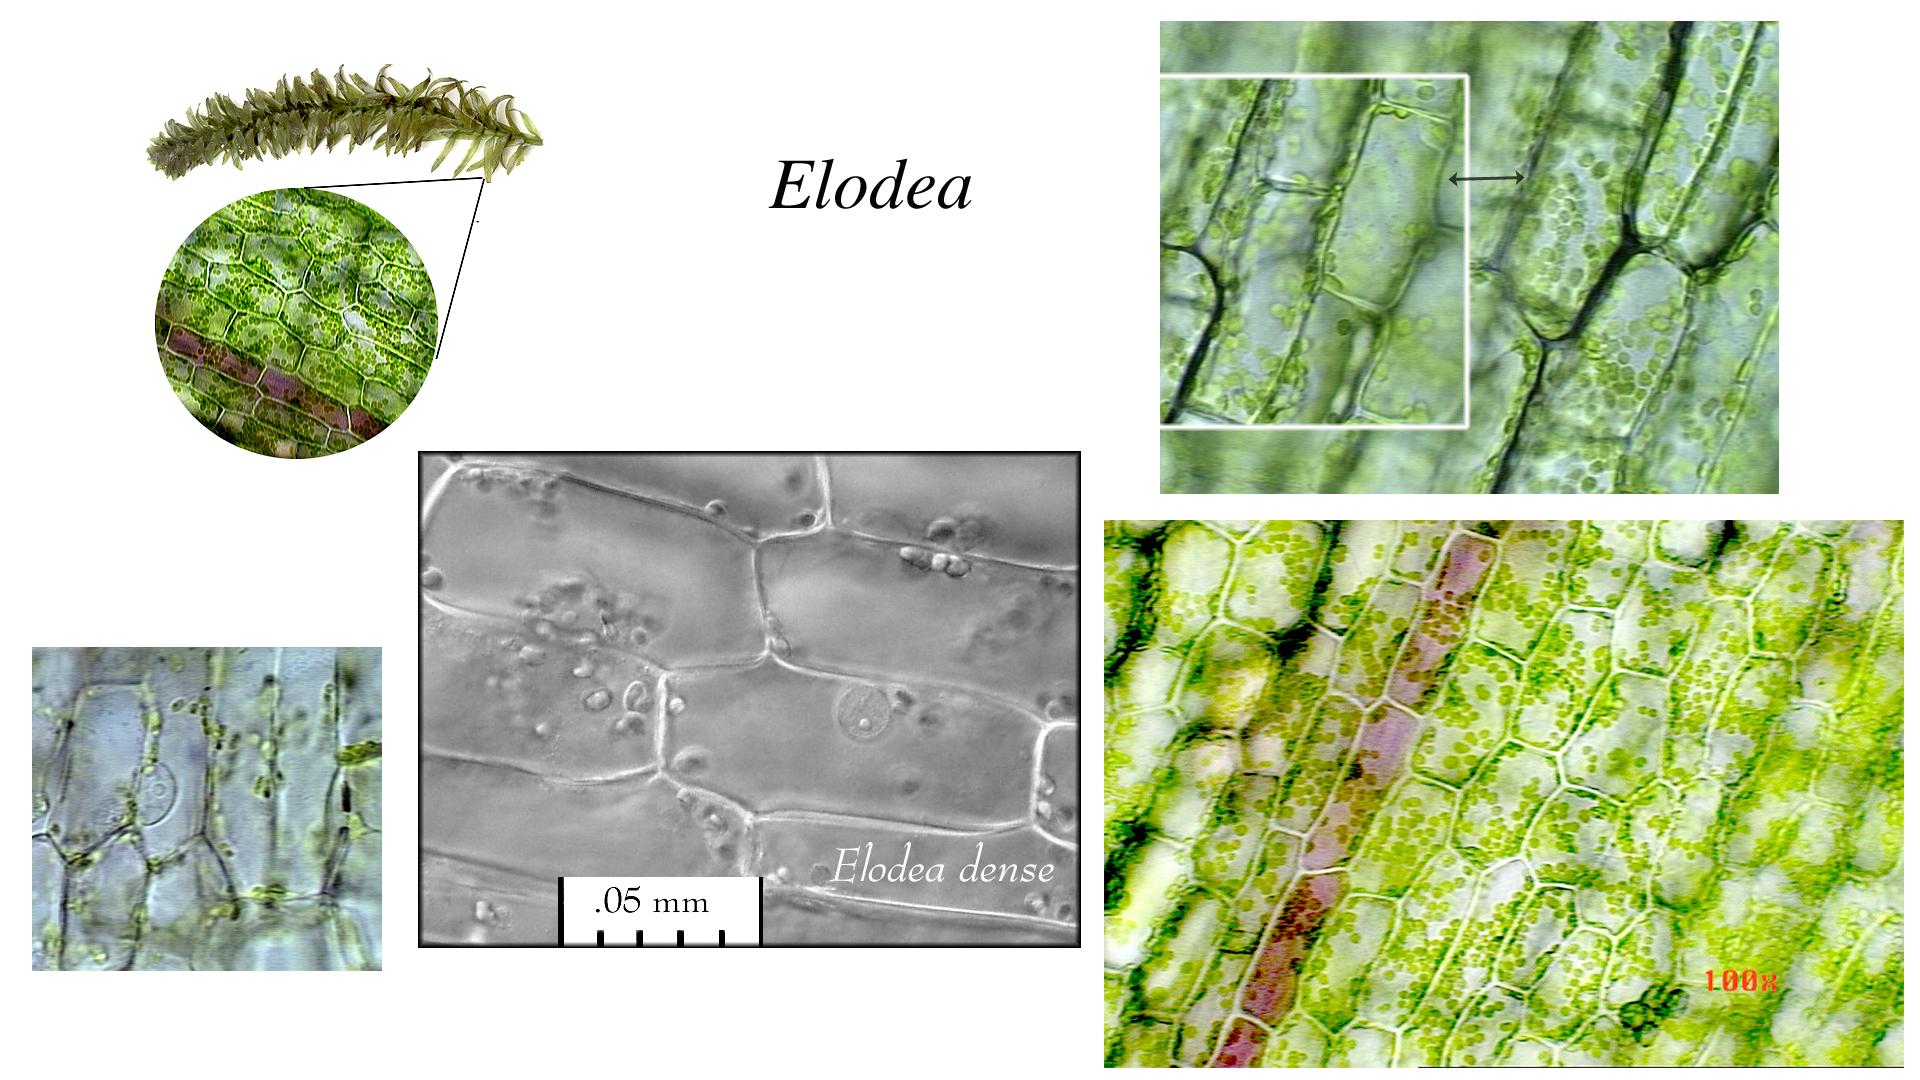 Why do chloroplast move in elodea?